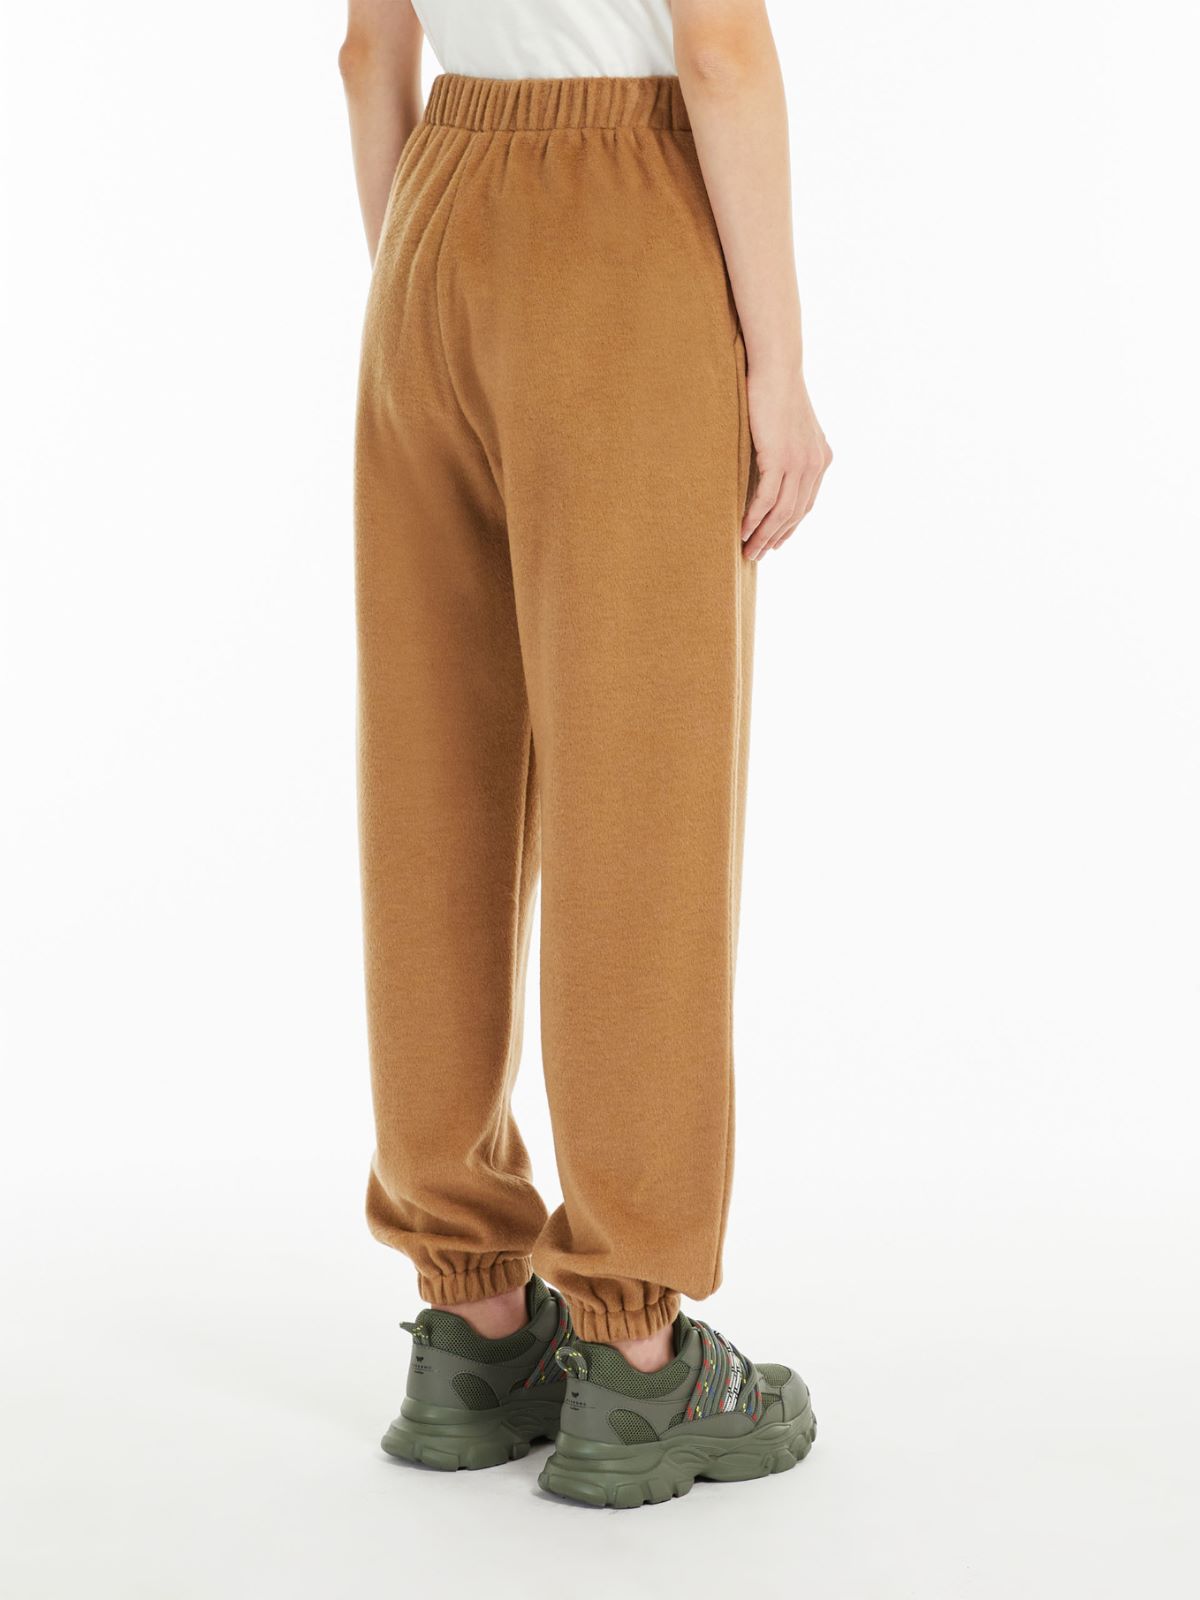 Wool and cotton jersey trousers - CAMEL - Weekend Max Mara - 3